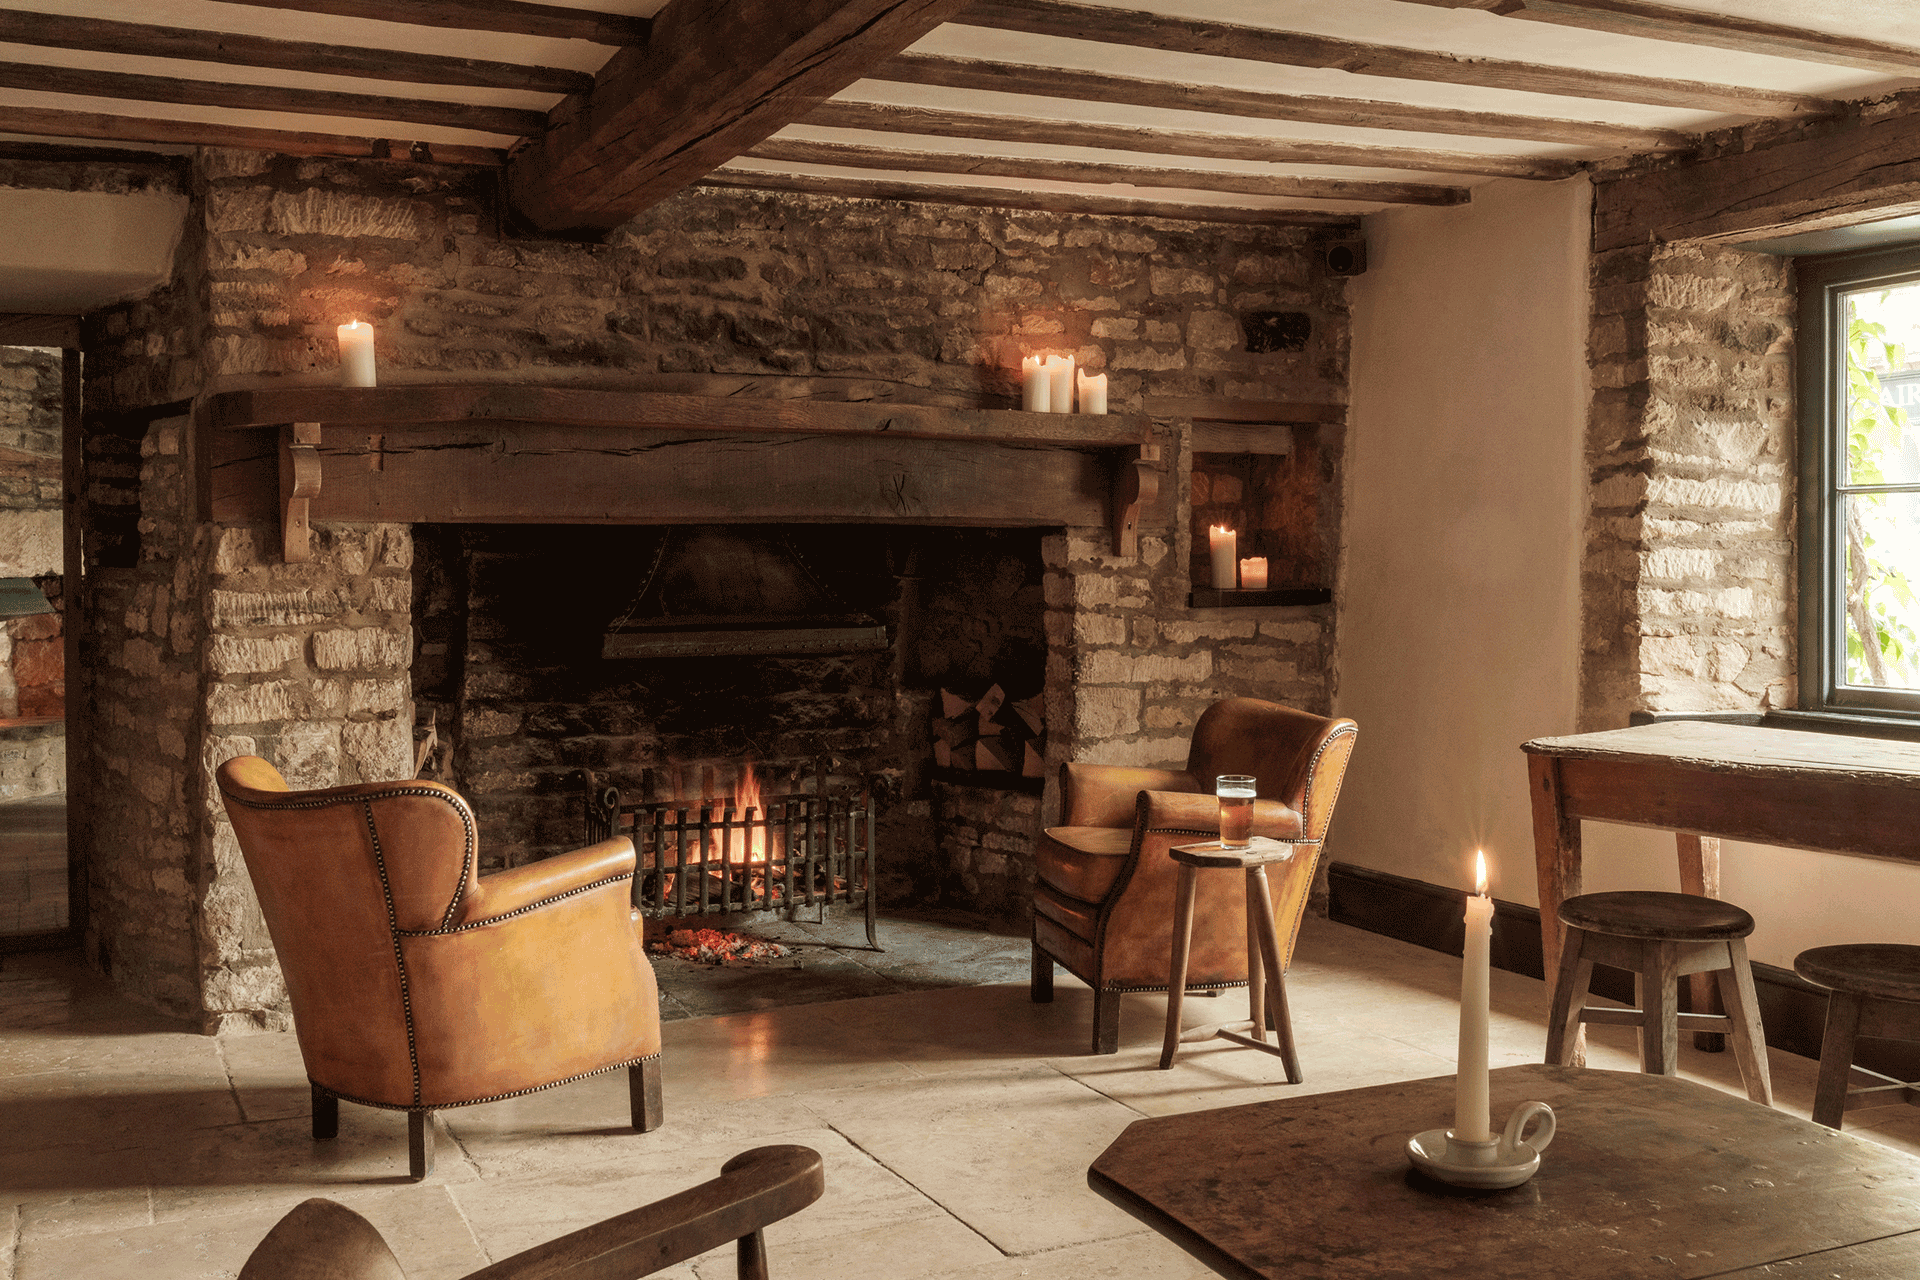 Rustic living room with ceiling beams and fireplace.